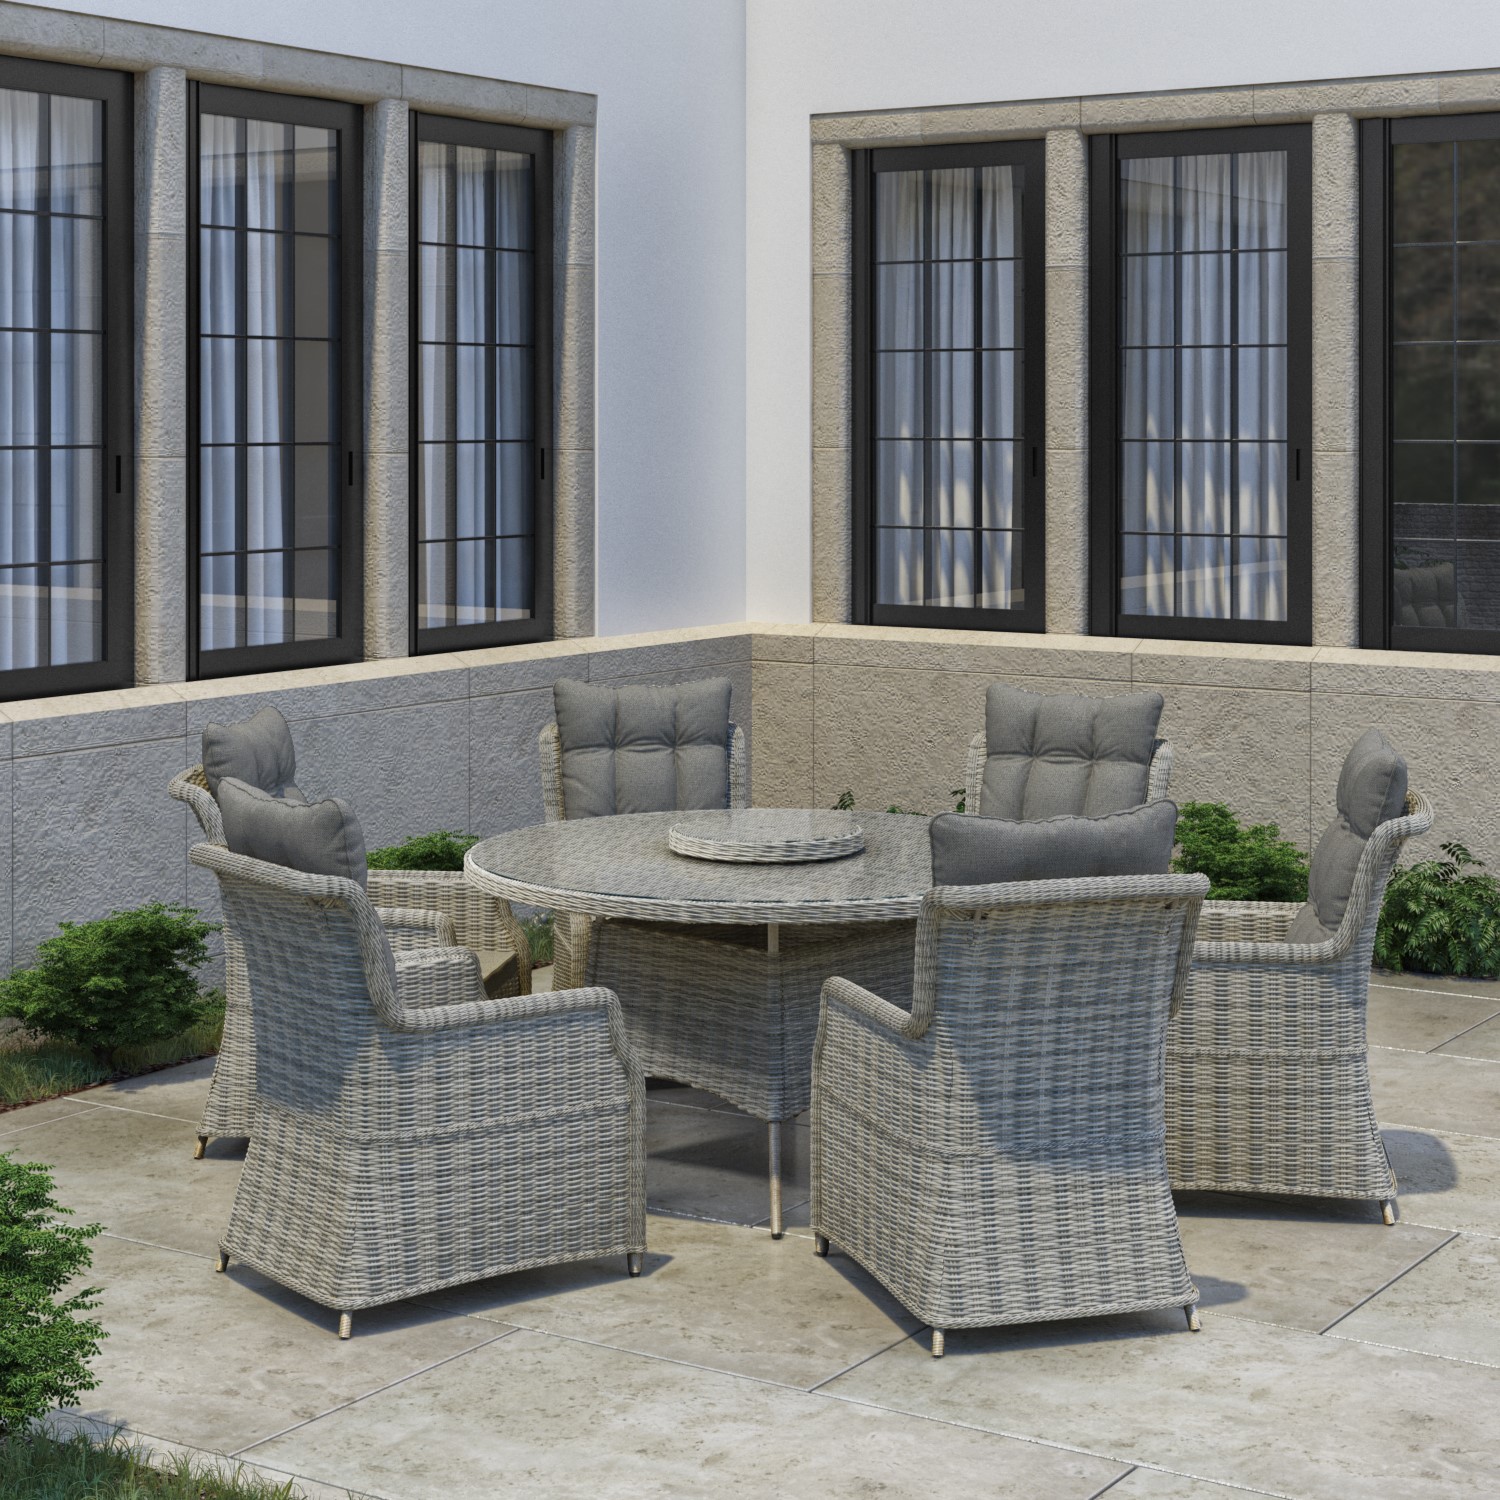 6 Seater Grey Round Rattan Garden, 6 Seater Round Dining Table And Chairs Outdoor